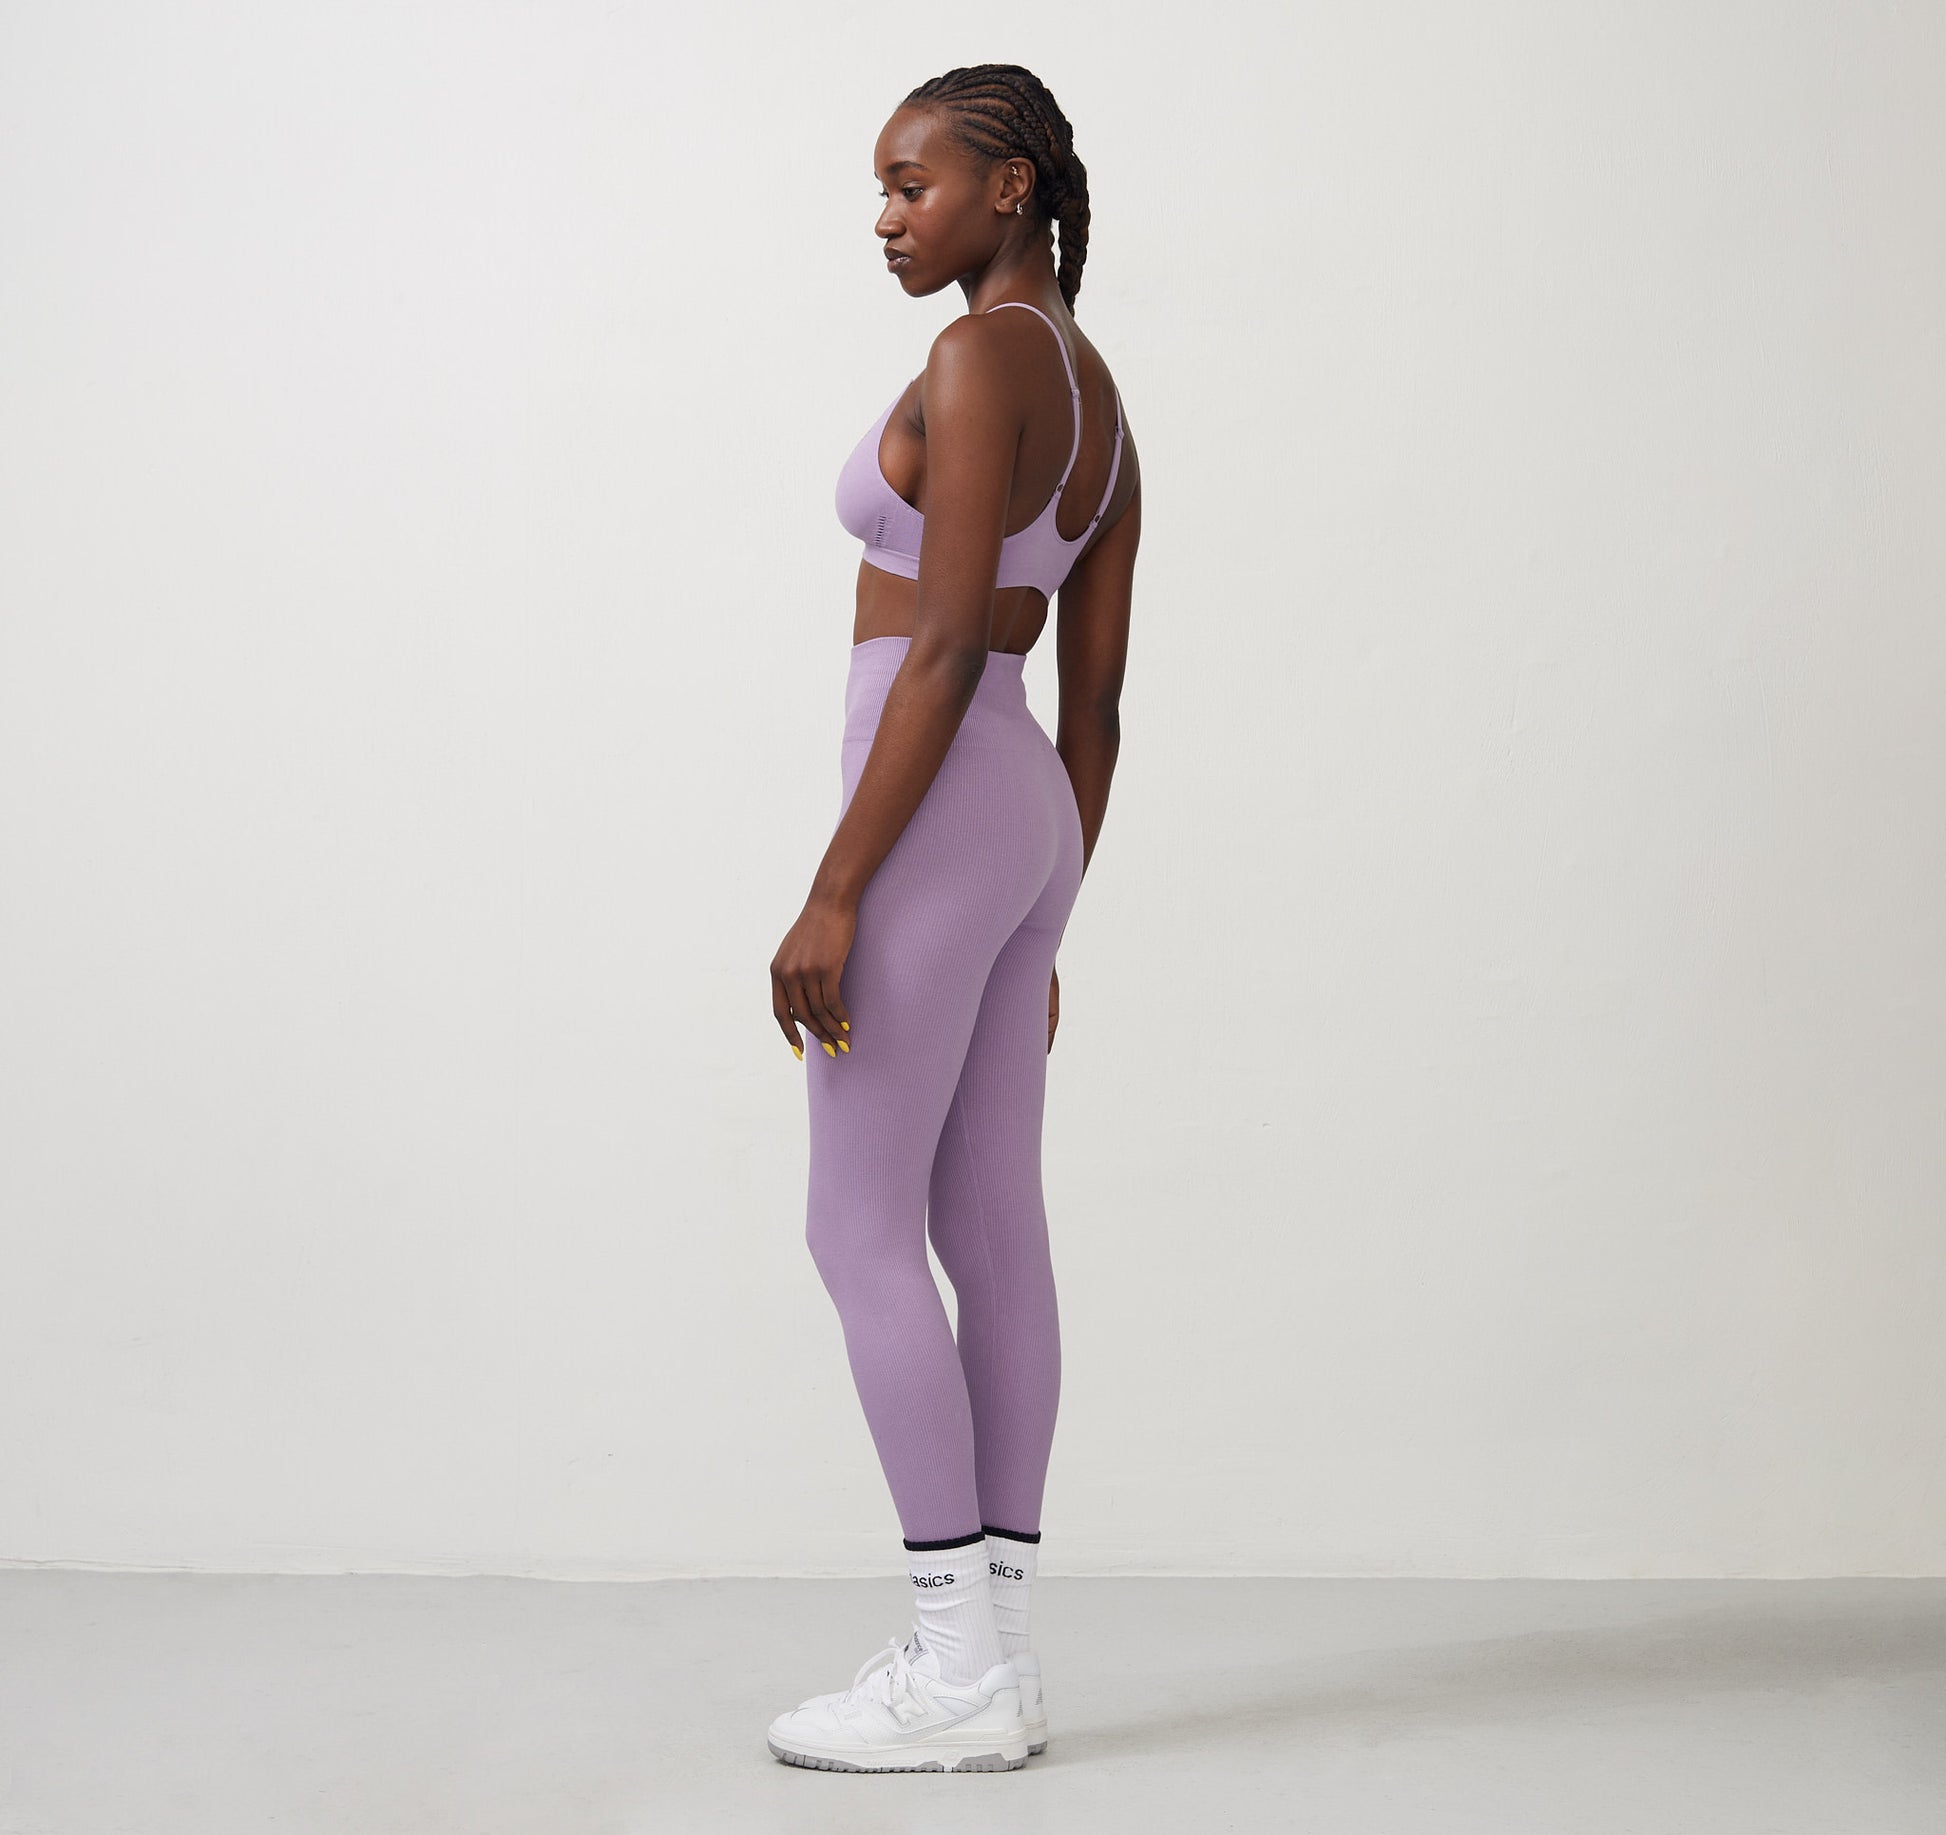 In Action Stretch Organic Cotton Leggings